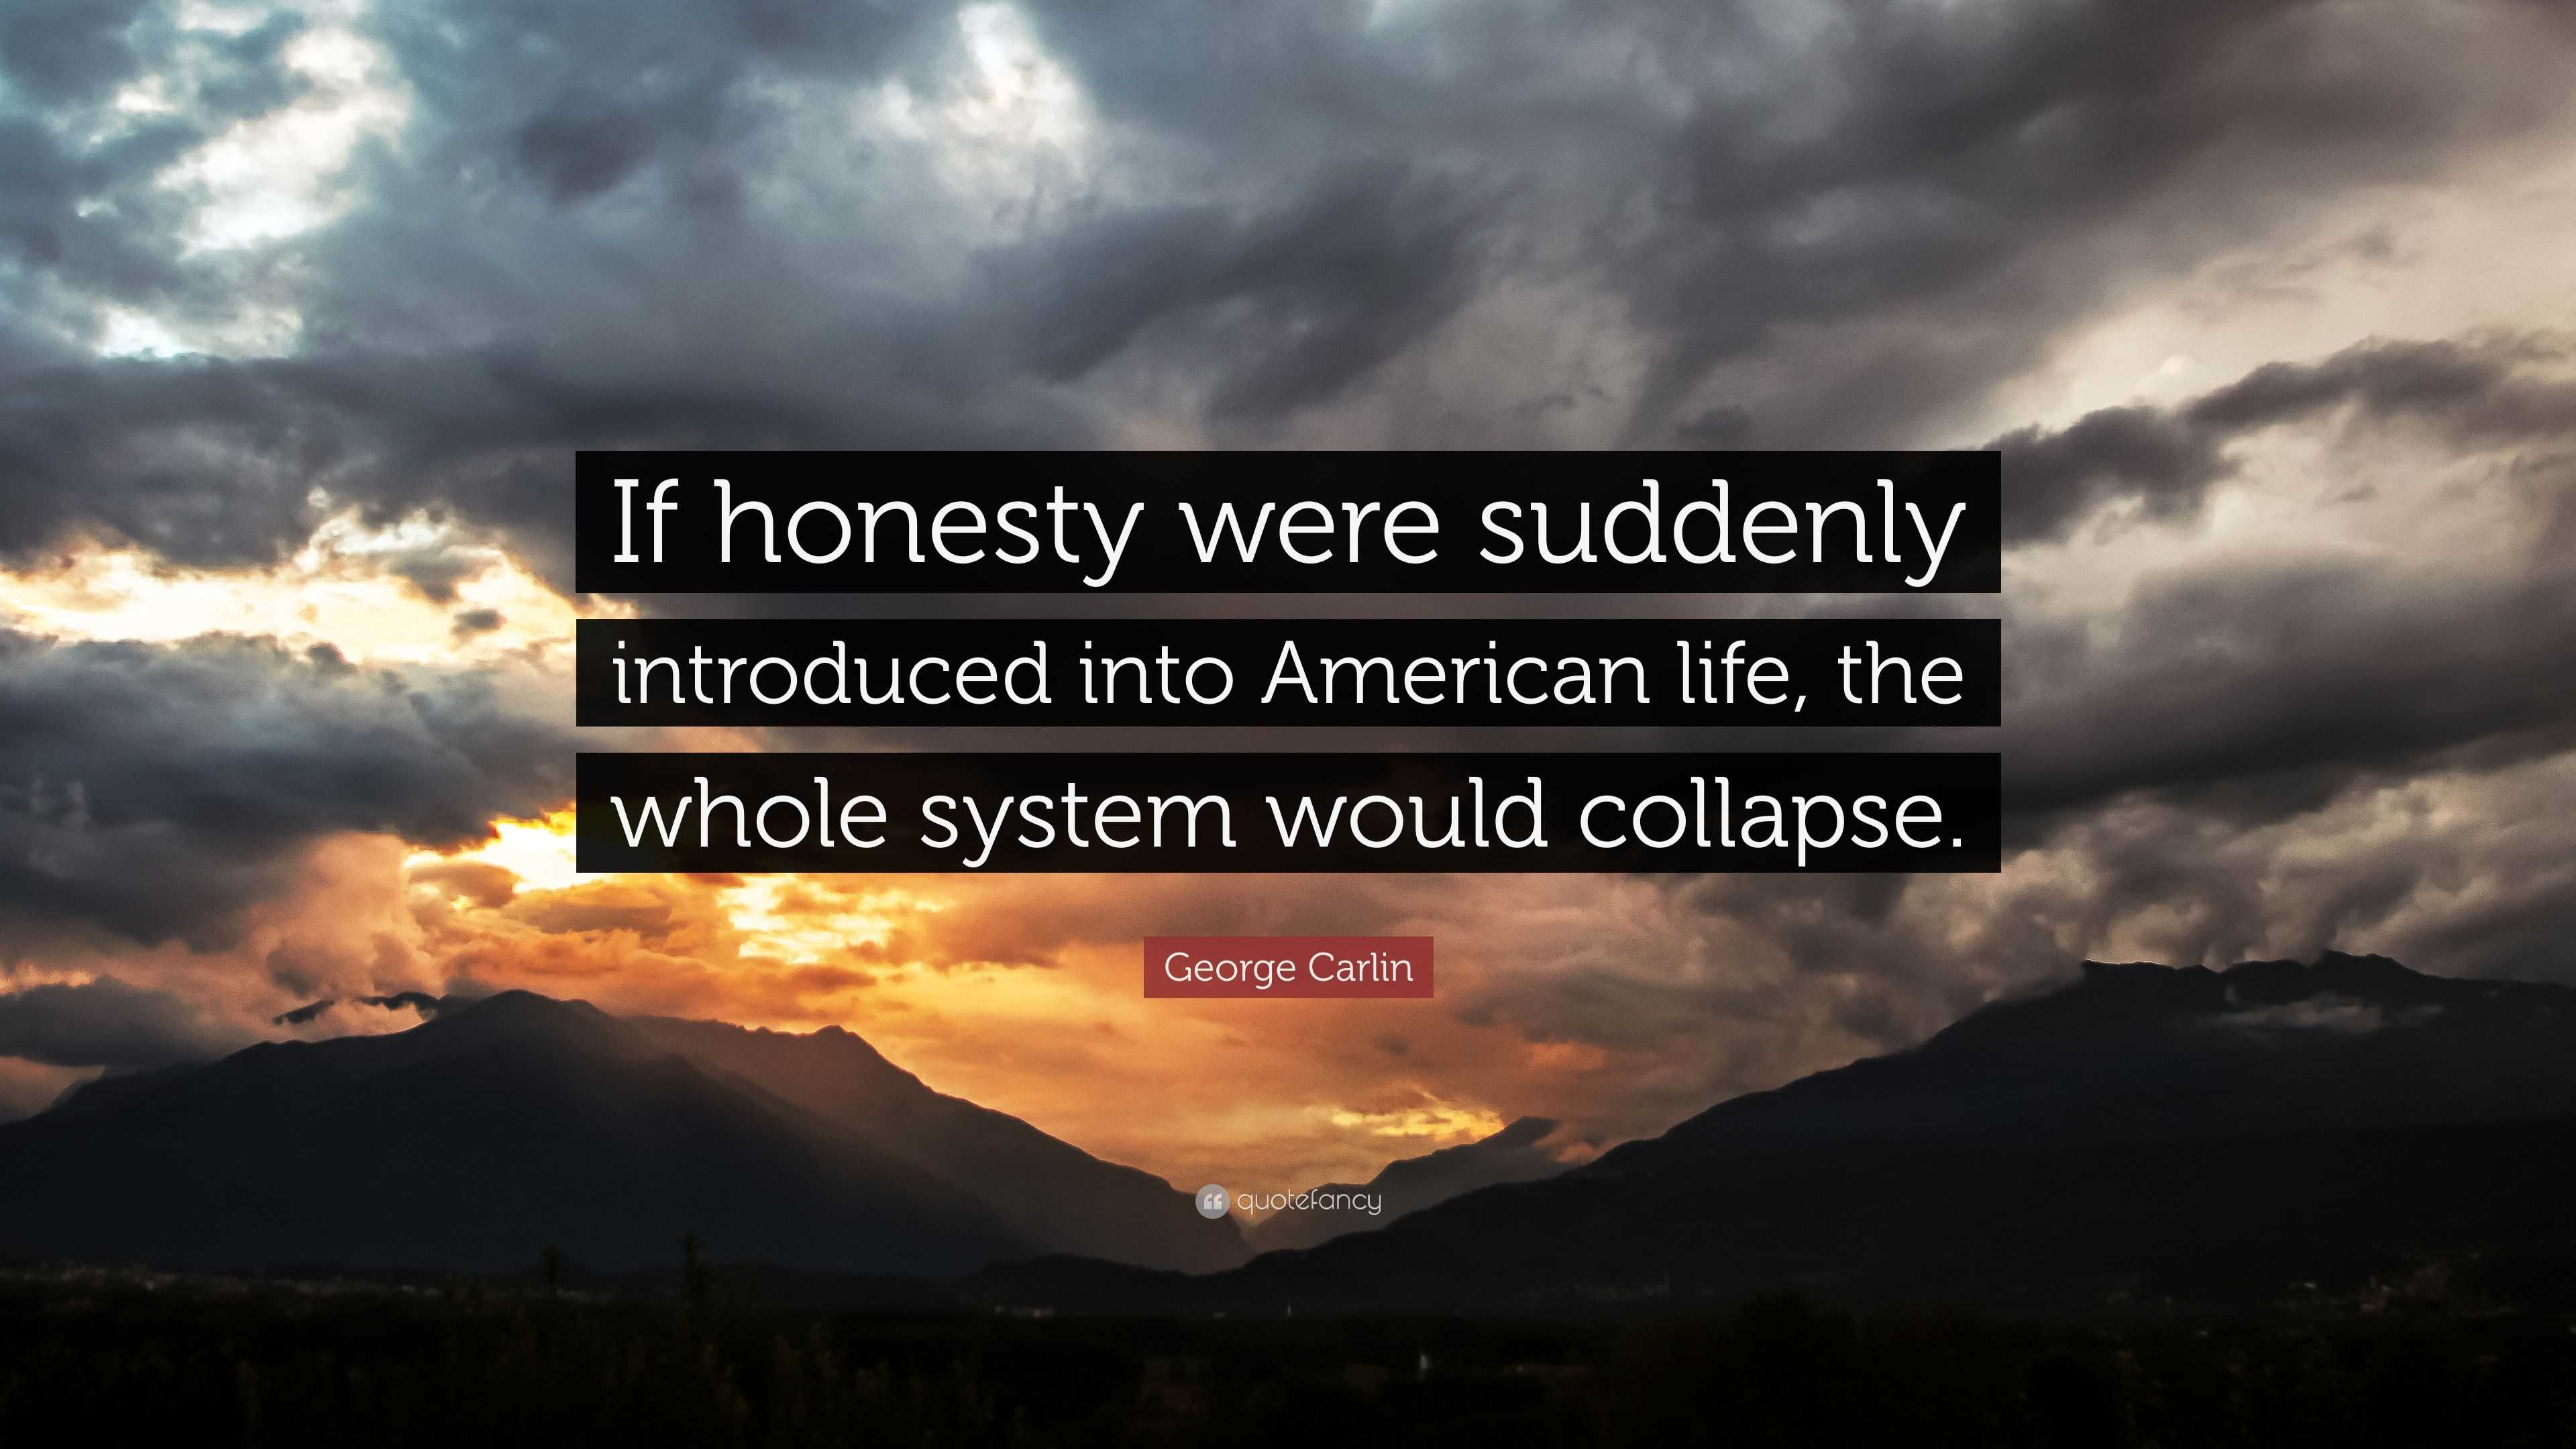 George Carlin Quote: “If honesty were suddenly introduced into American